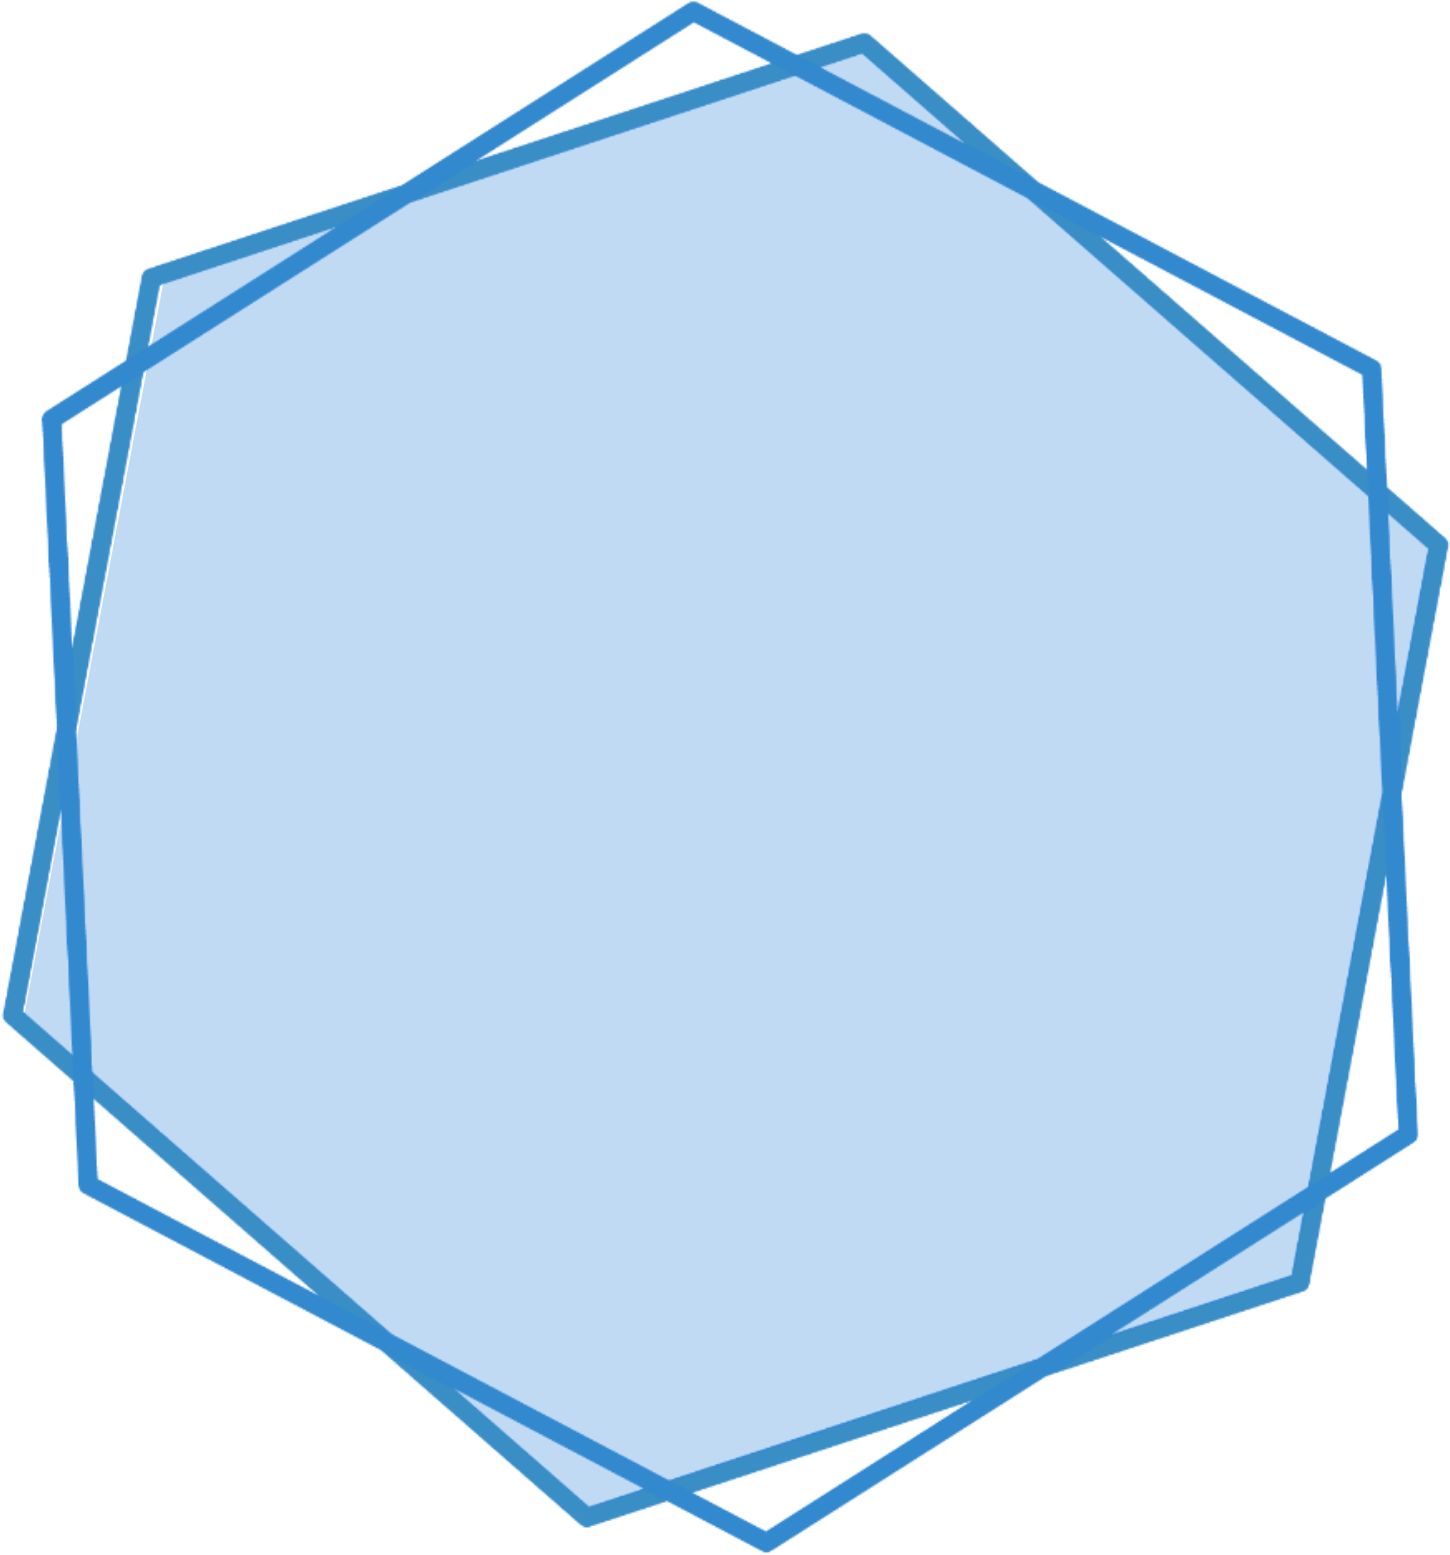 Abstract Blue Pentagon Overlay